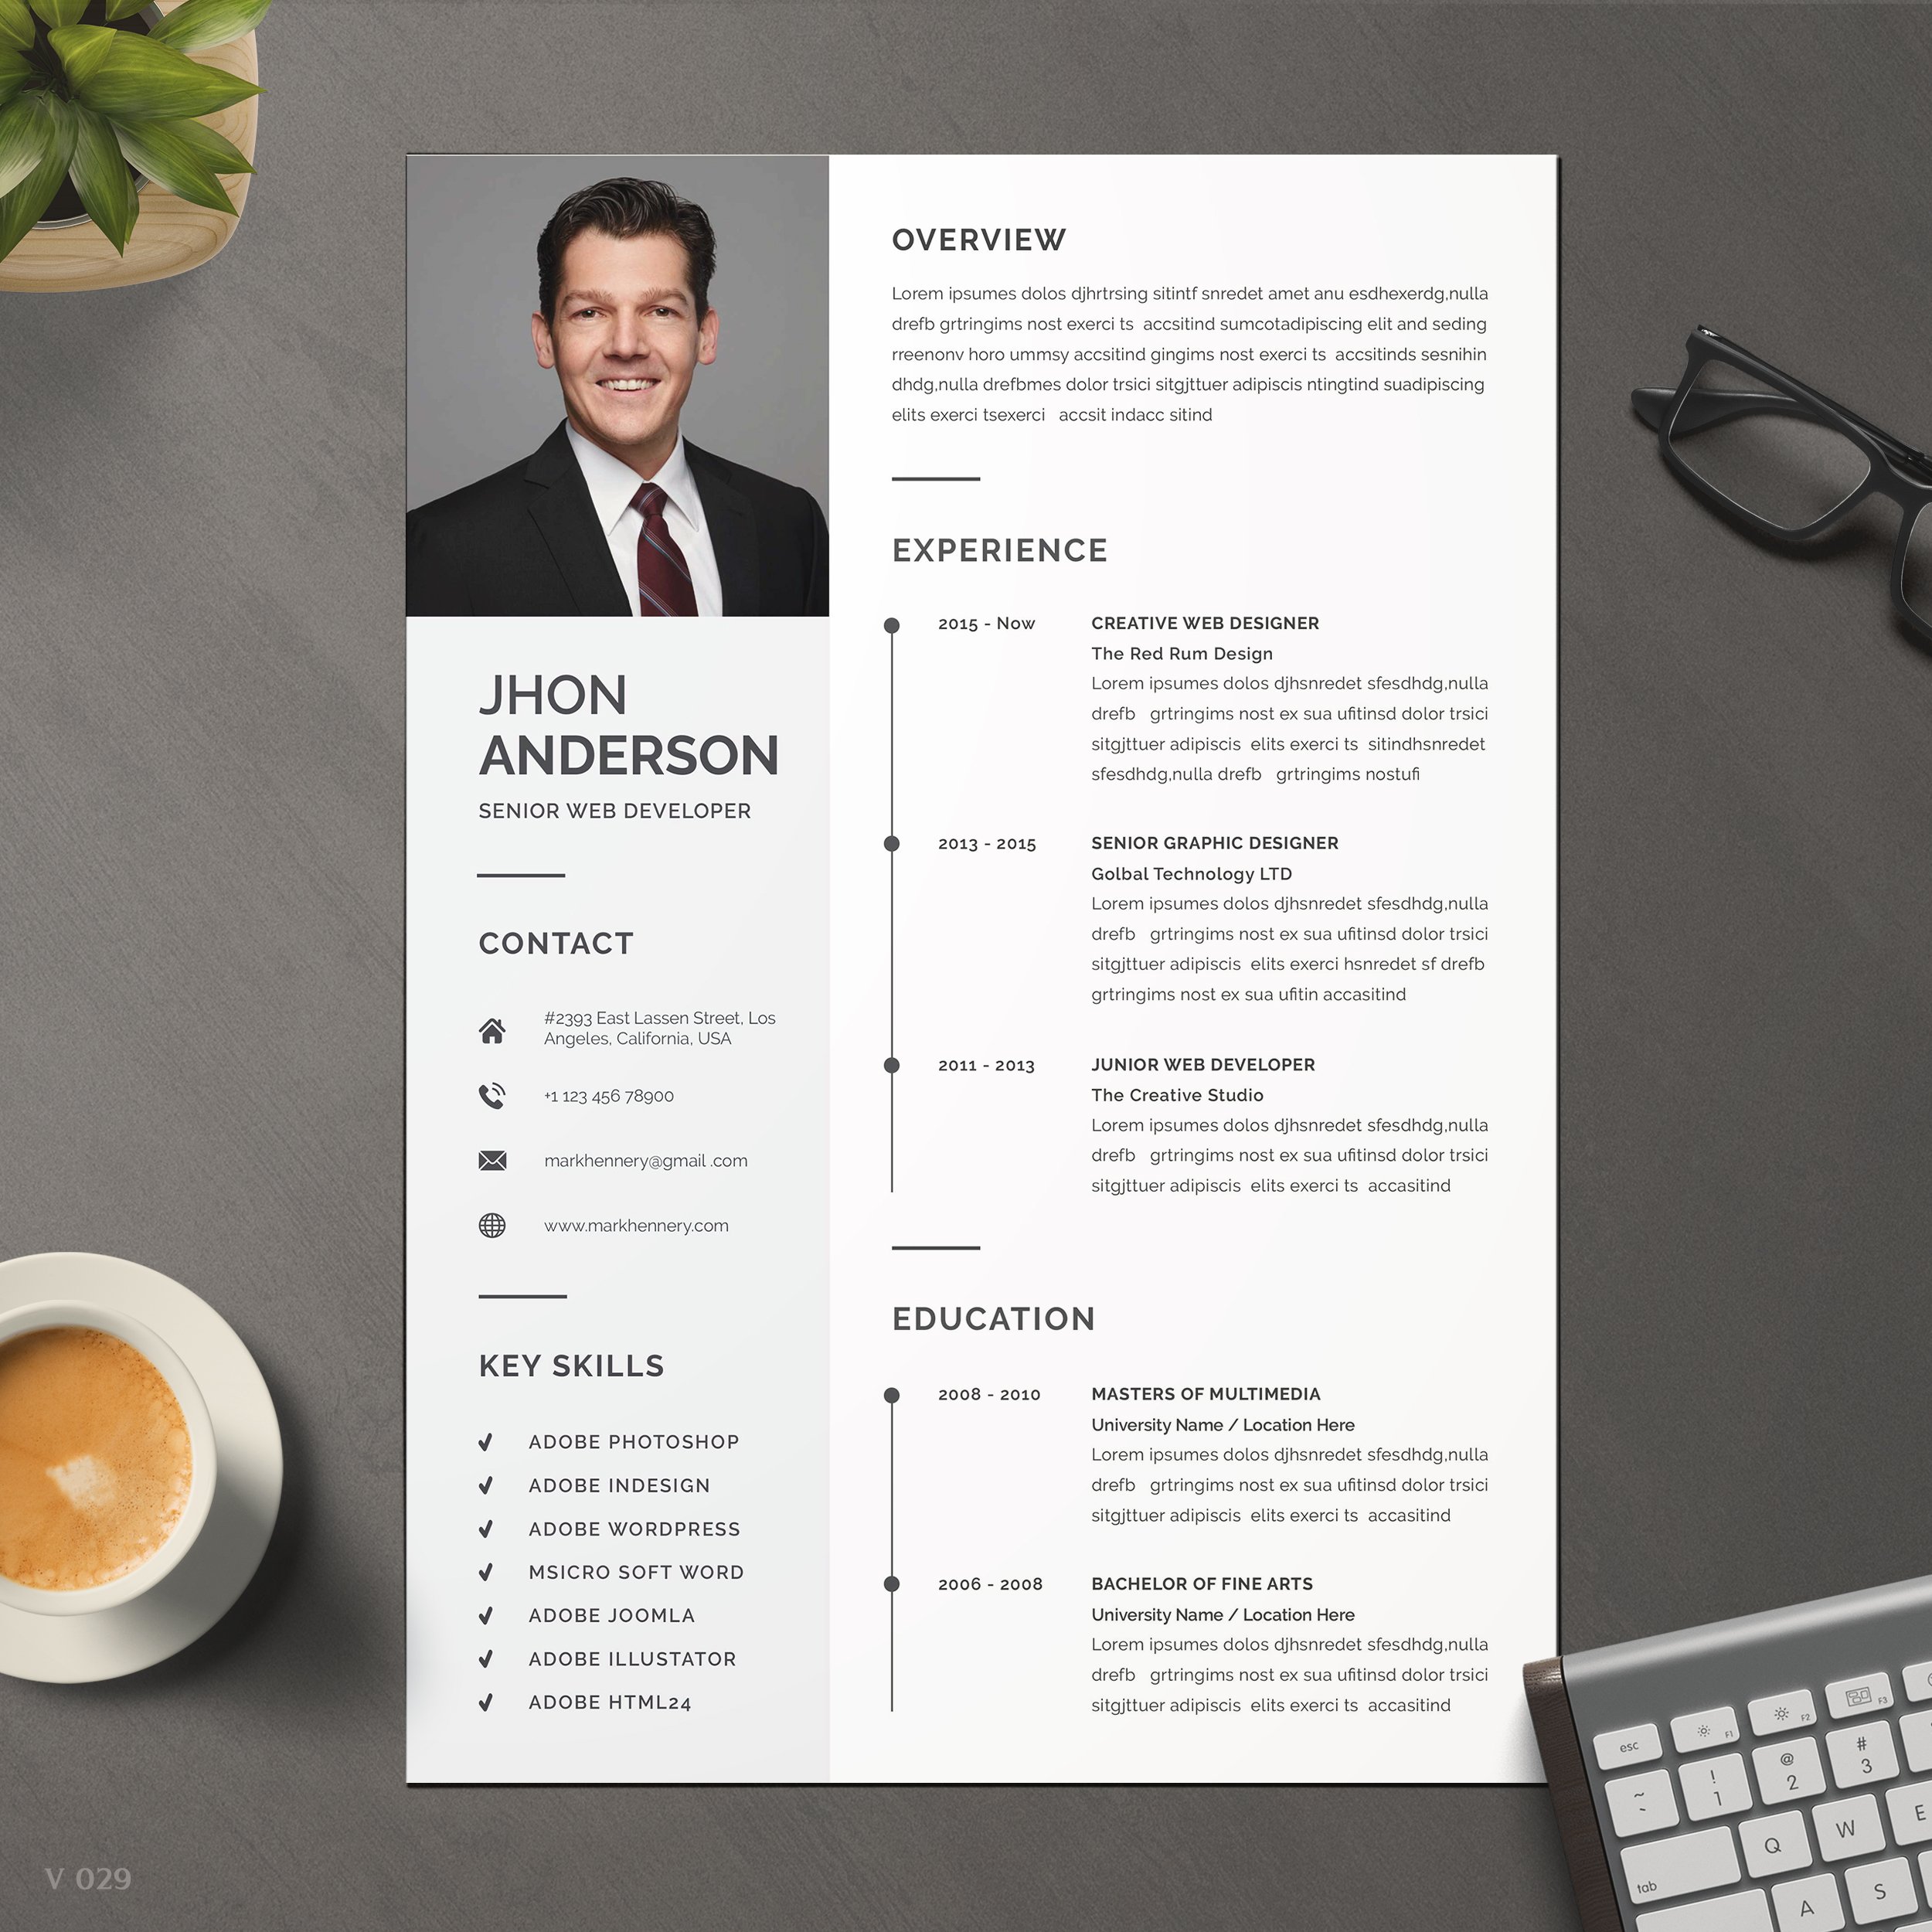 Word Resume/CV cover image.